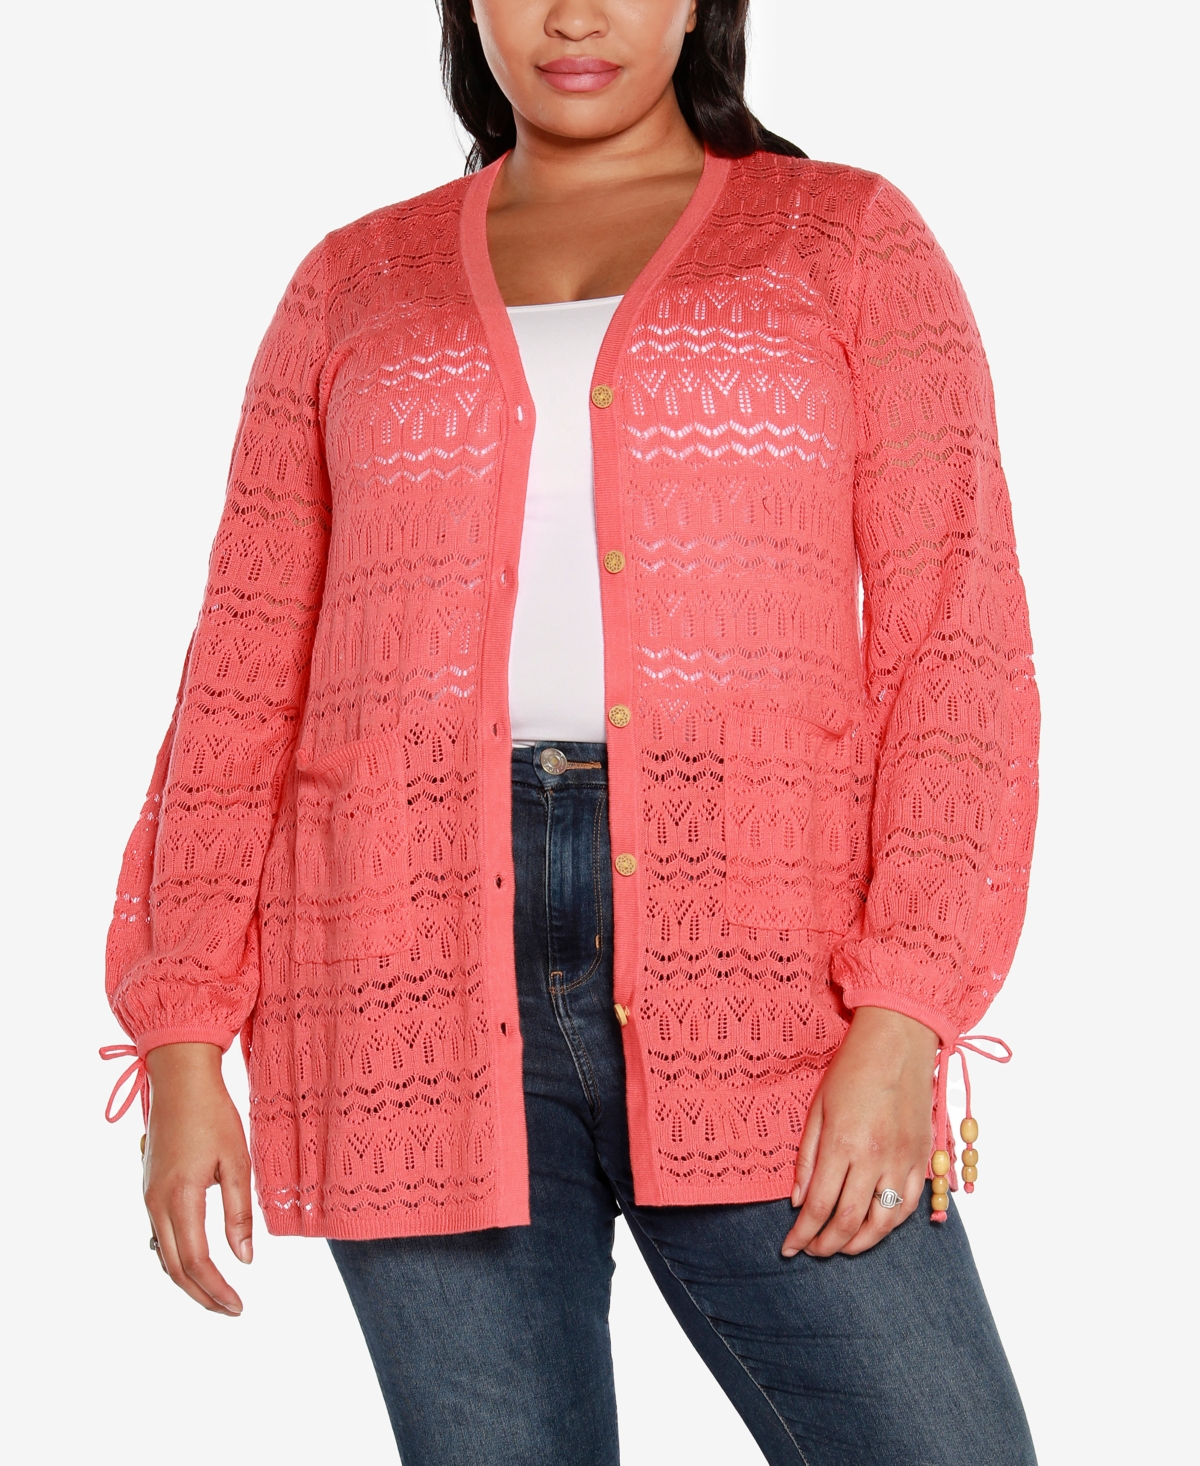 Belldini Black Label Petite Size Long Sleeve Duster Sweater In Coral | ModeSens